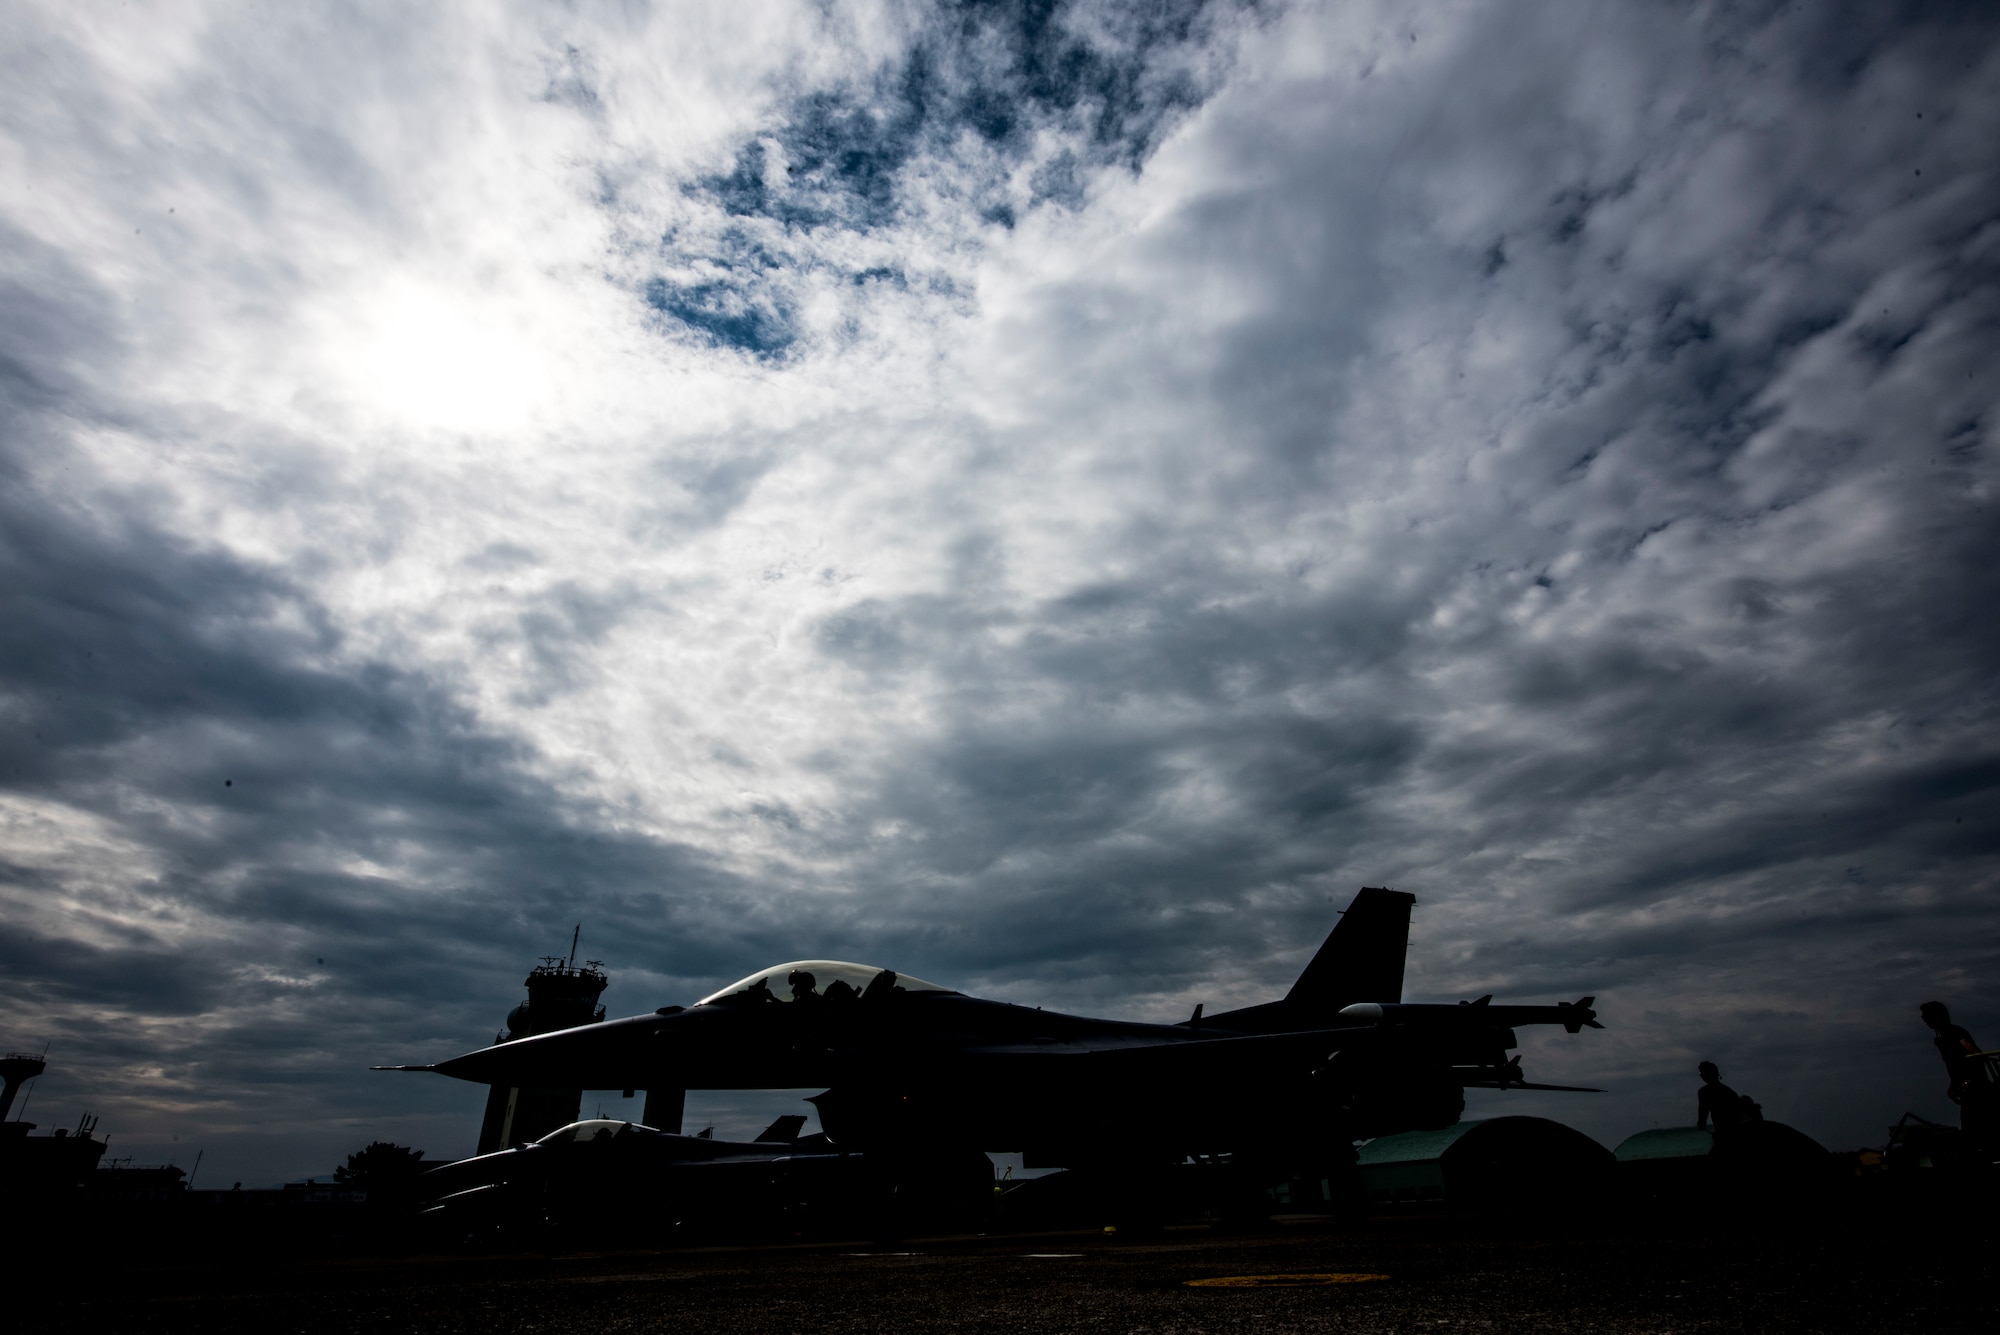 A U.S. Air Force F-16 Fighting Falcon sits on the Komatsu flight line during the 2019 Komatsu aviation training relocation at Komatsu Air Base, Japan, Oct. 2, 2019. The ATR gave 13th Fighter Squadron pilots an opportunity to work alongside their host nation counterparts, Japan Air Self-Defense Force, during the 28 within visual range air-to-air sorties. (U.S. Air Force photo by Senior Airman Collette Brooks)